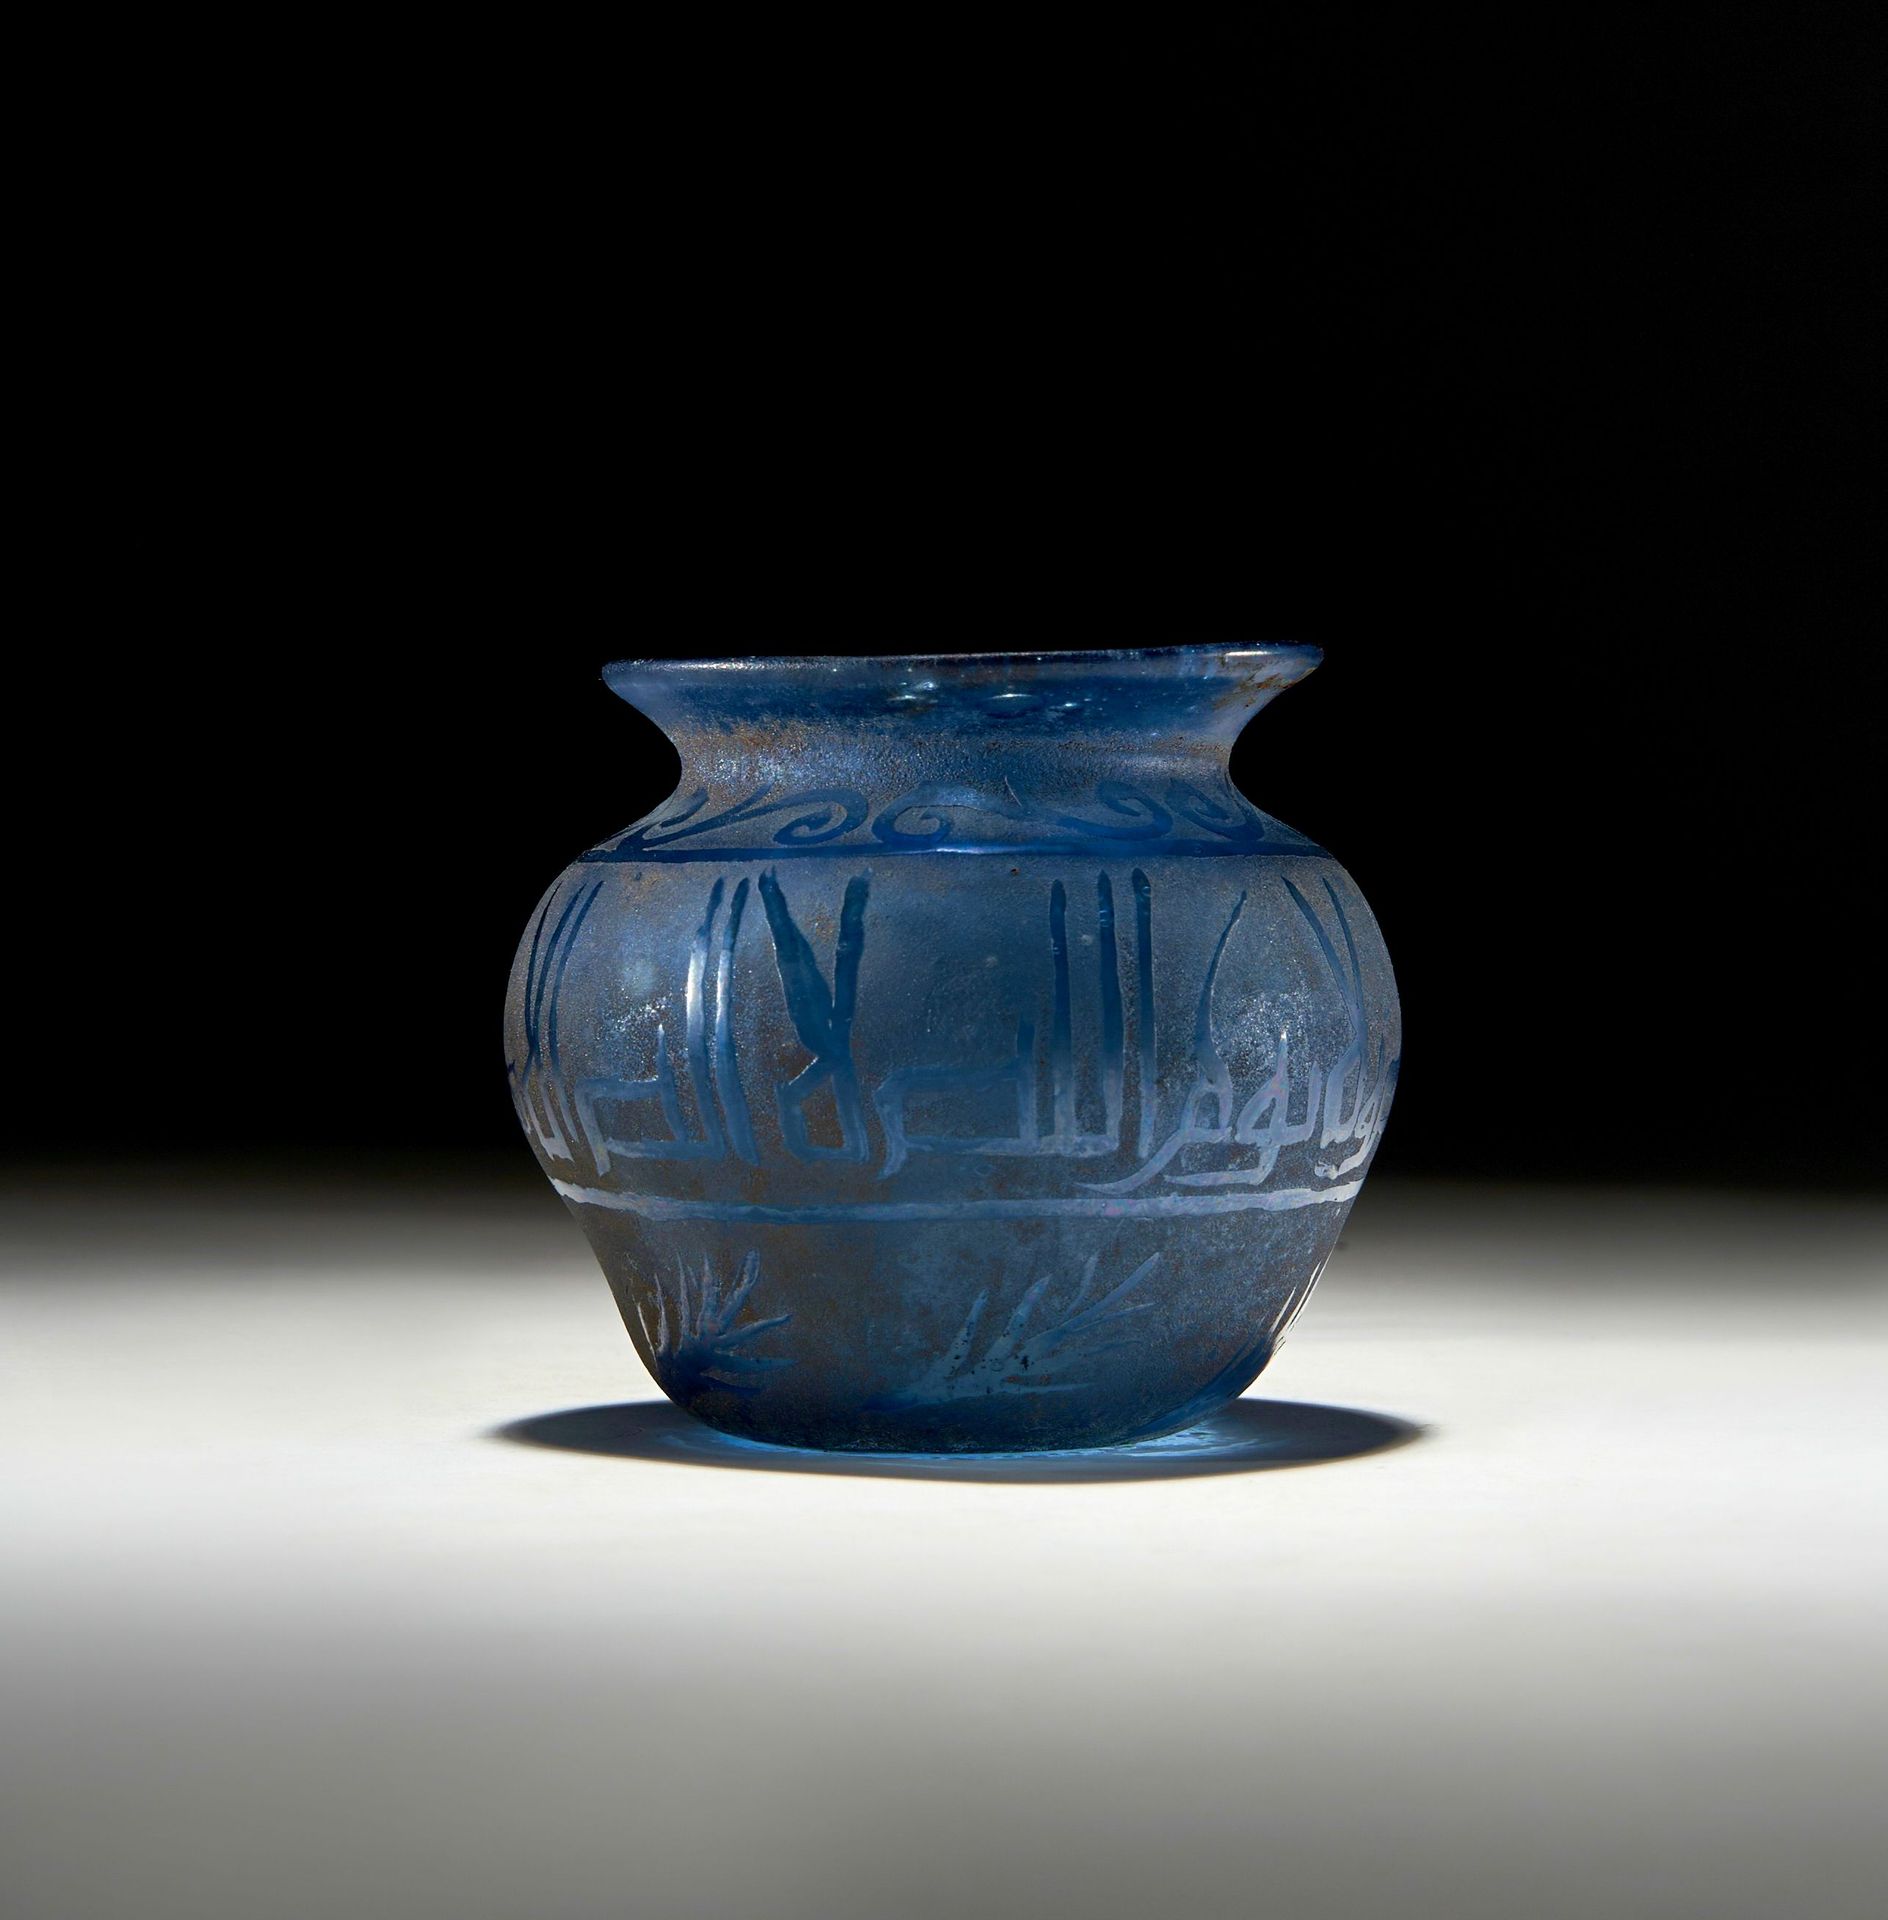 A KUFIC INSCRIBED BLUE GLASS POT, PROBABLY 9TH-11TH CENTURY A.D. A KUFIC INSCRIB&hellip;